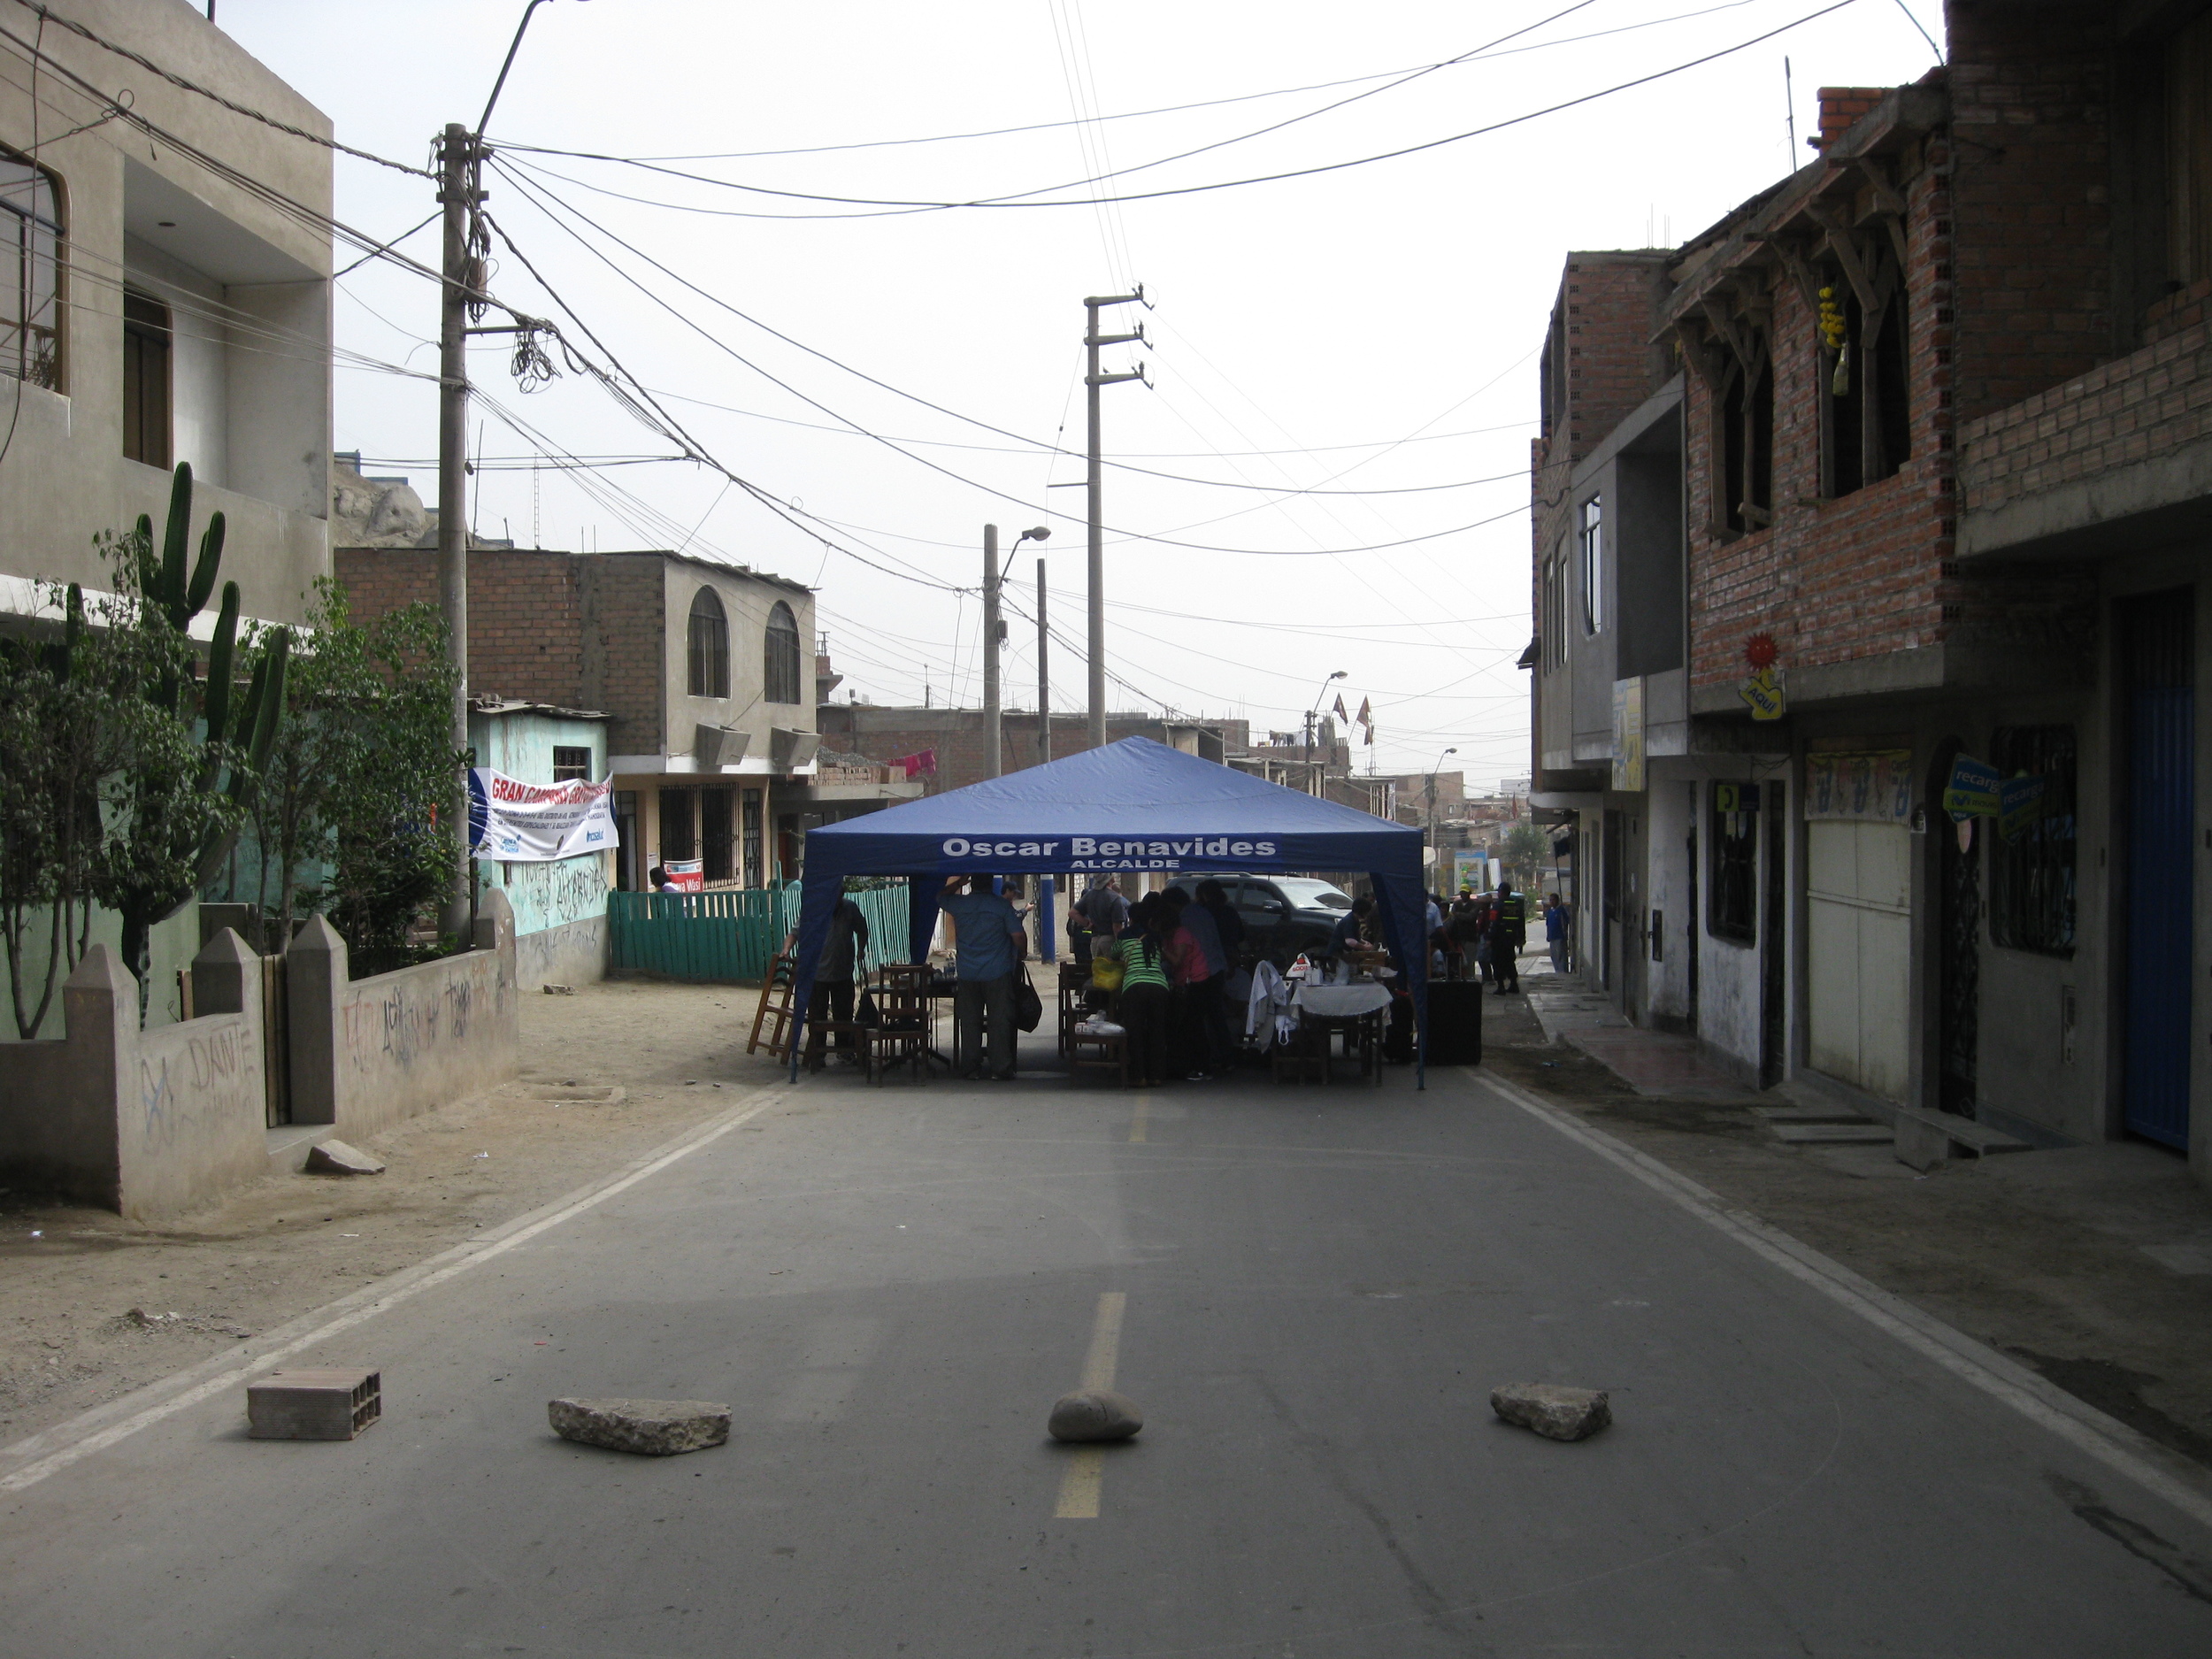  There was no clinic site set aside for us. At the suggestion of the local vendors, we blocked off the street. 